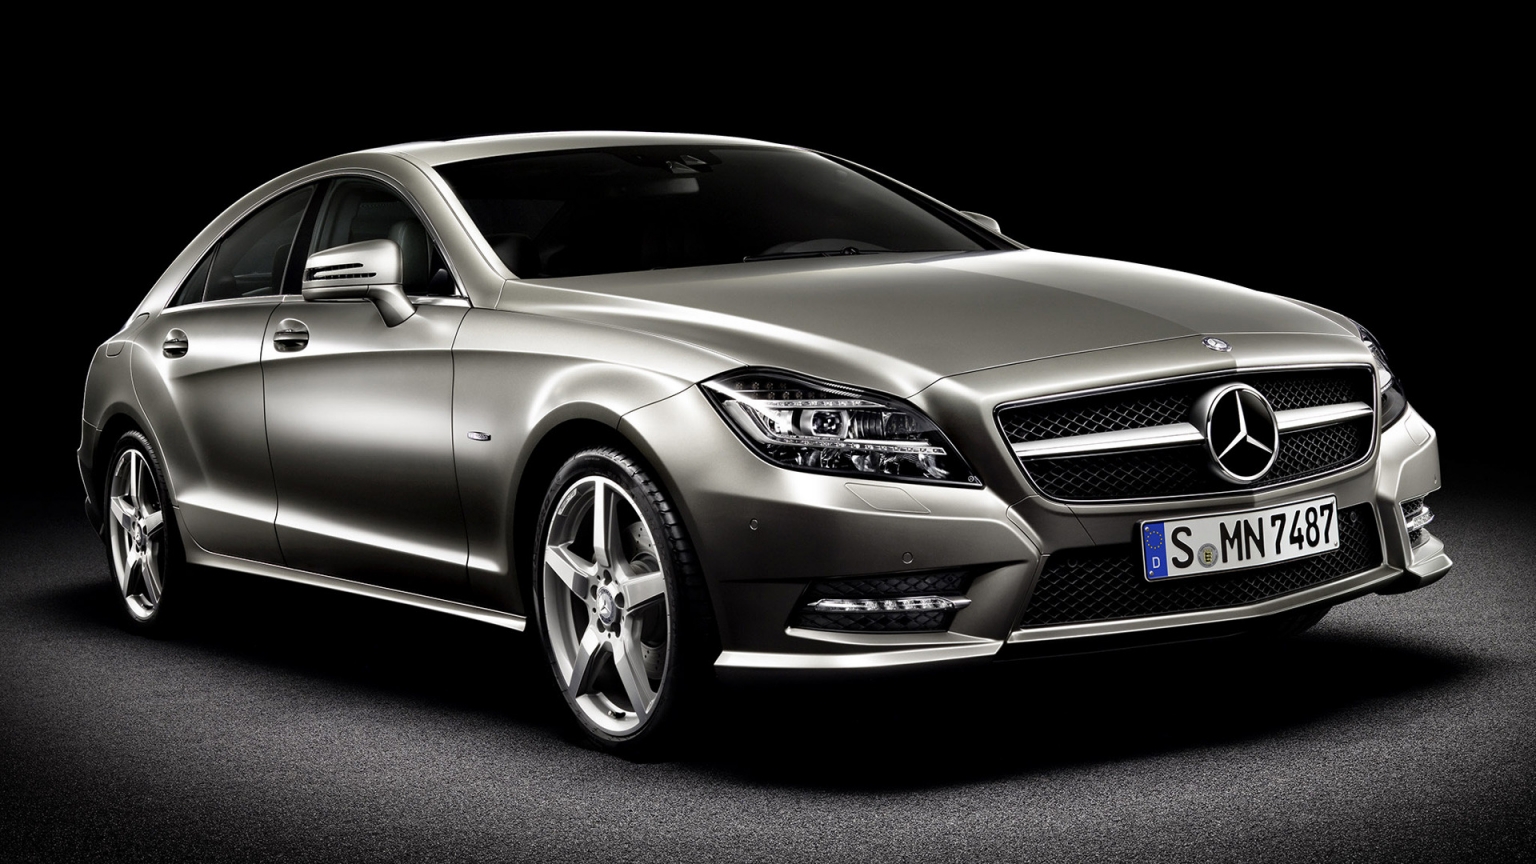 Mercedes CLS 2010 for 1536 x 864 HDTV resolution